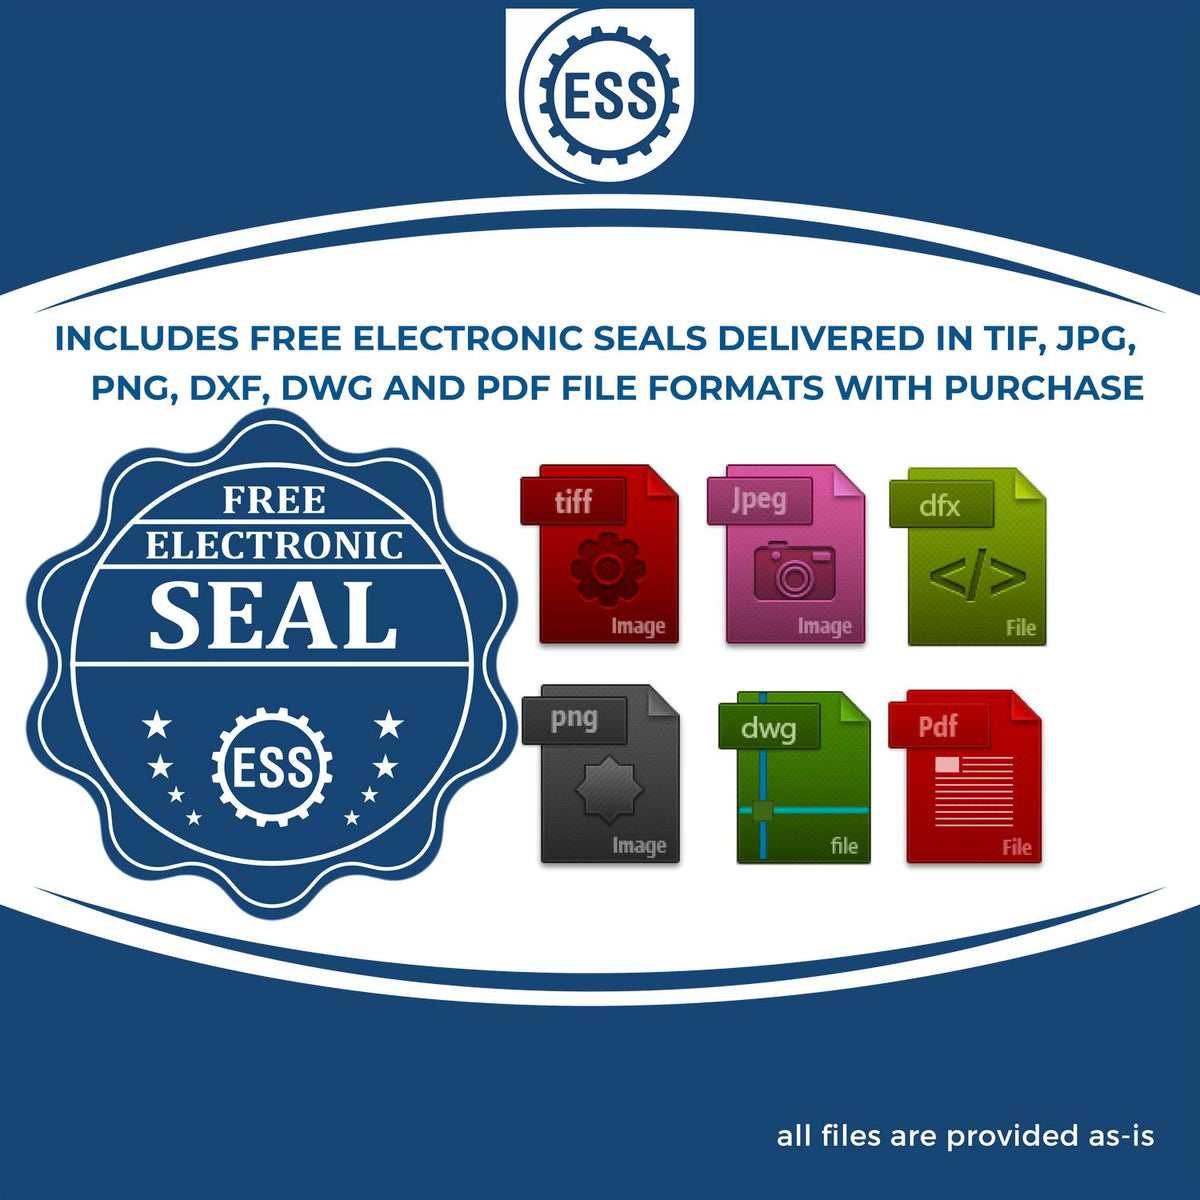 An infographic for the free electronic seal for the Slim Pre-Inked New Jersey Professional Engineer Seal Stamp illustrating the different file type icons such as DXF, DWG, TIF, JPG and PNG.